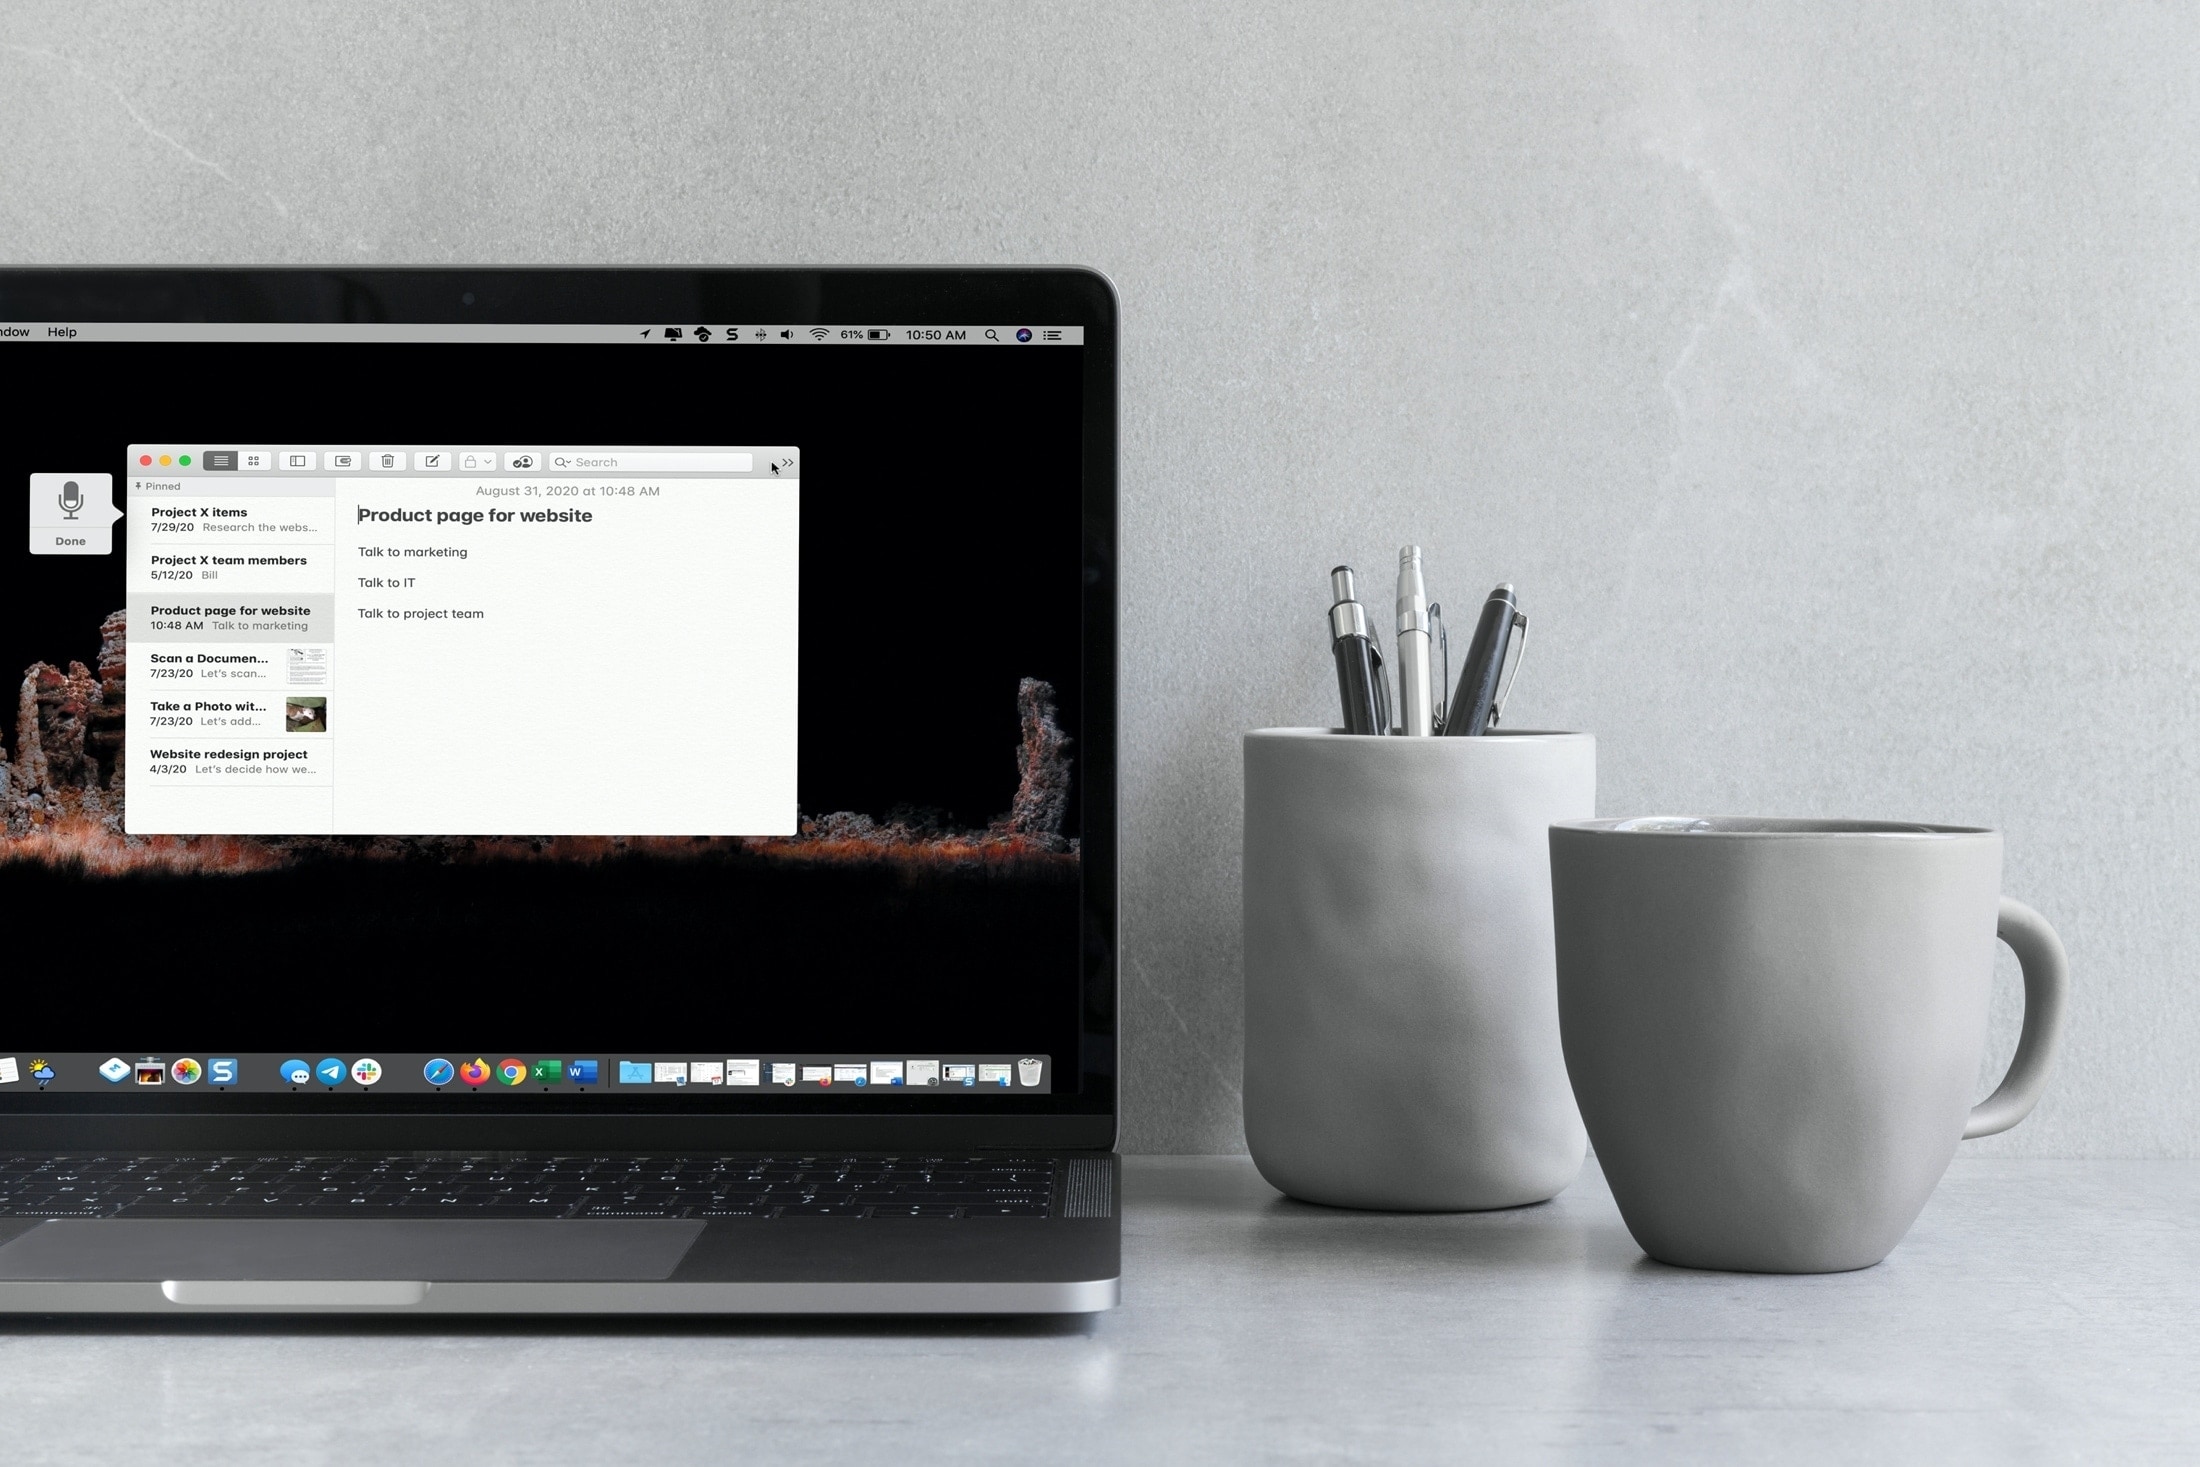 Guide to Dictation on Mac